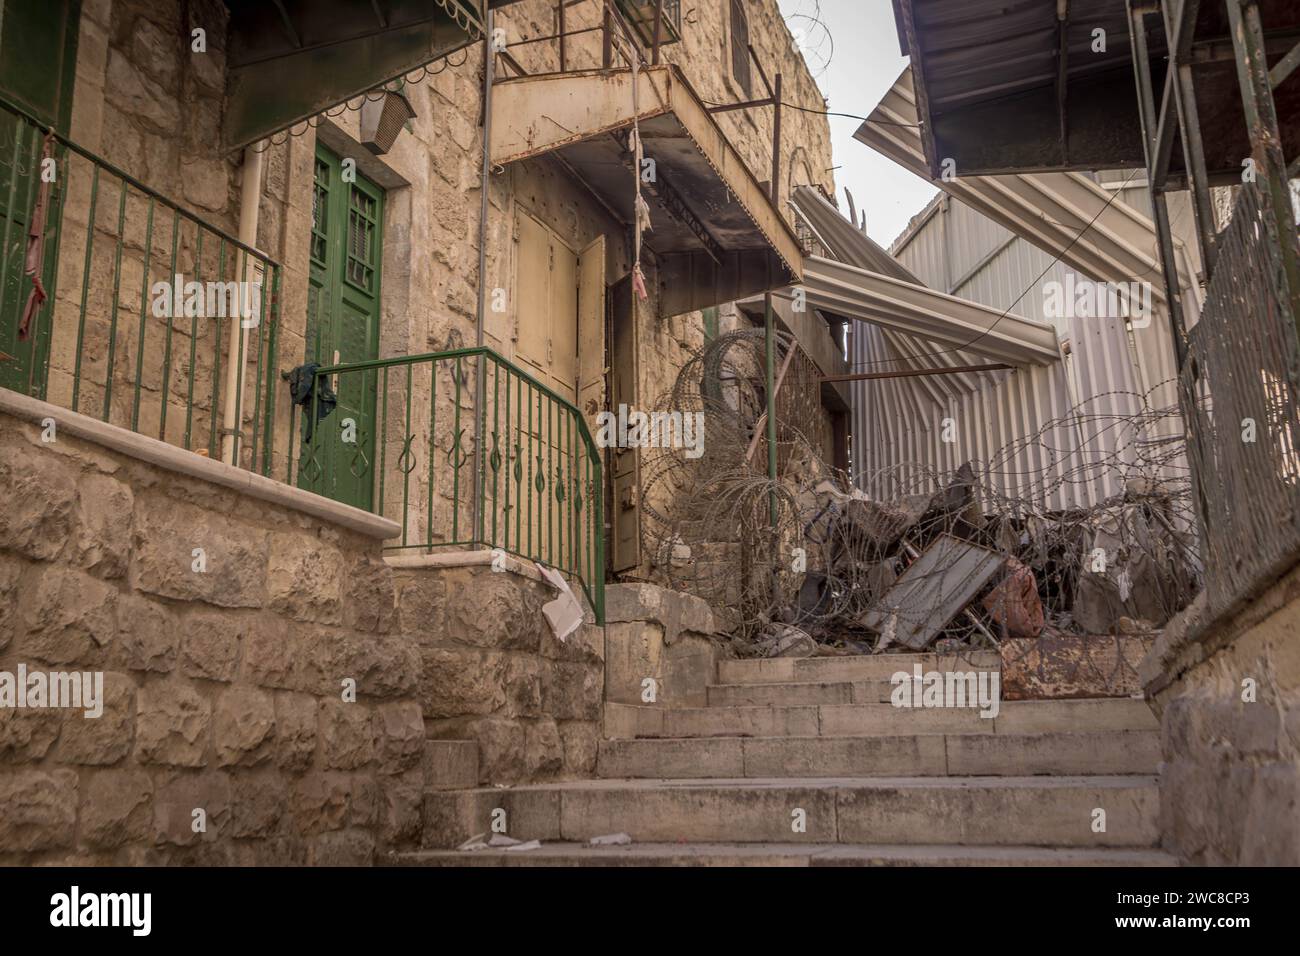 The barbed wire and the blocked passage on the border between Israeli-controlled and Palestine-controlled areas of Hebron in Palestinian West Bank. Stock Photo